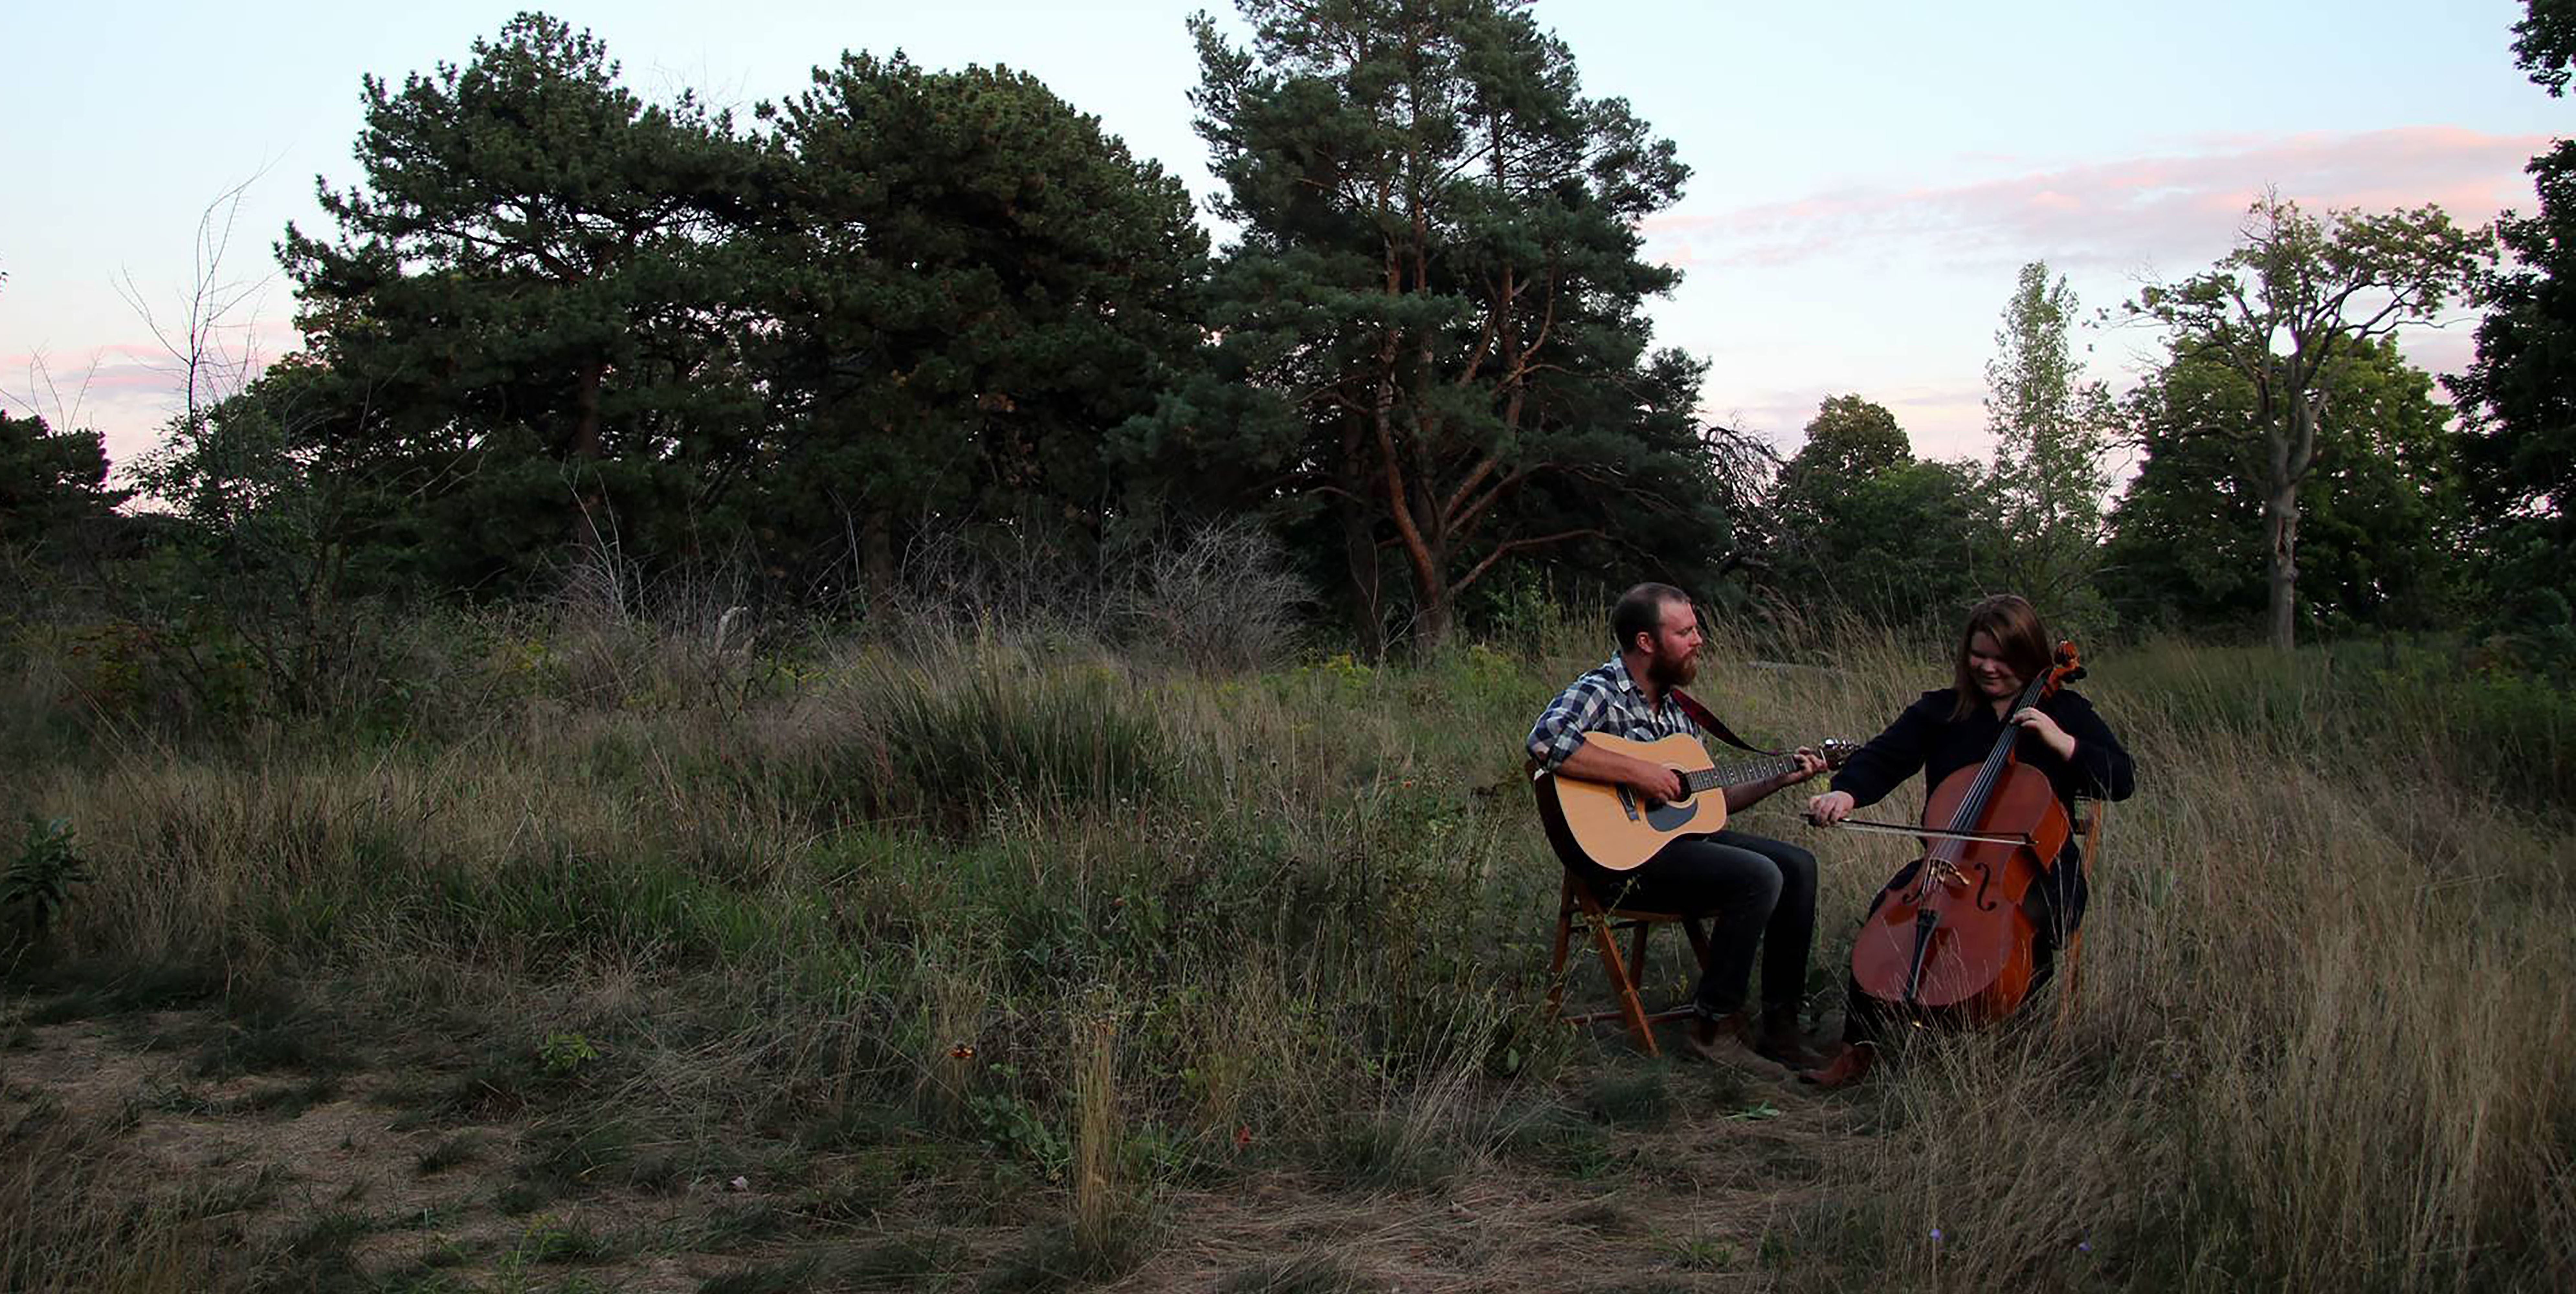 Photo of a man and a woman playing instruments while sitting in a field. The man on the left is holding a guitar and is wearing a grey collared shirt. The woman on the right is playing a cello and is wearing a black dress.